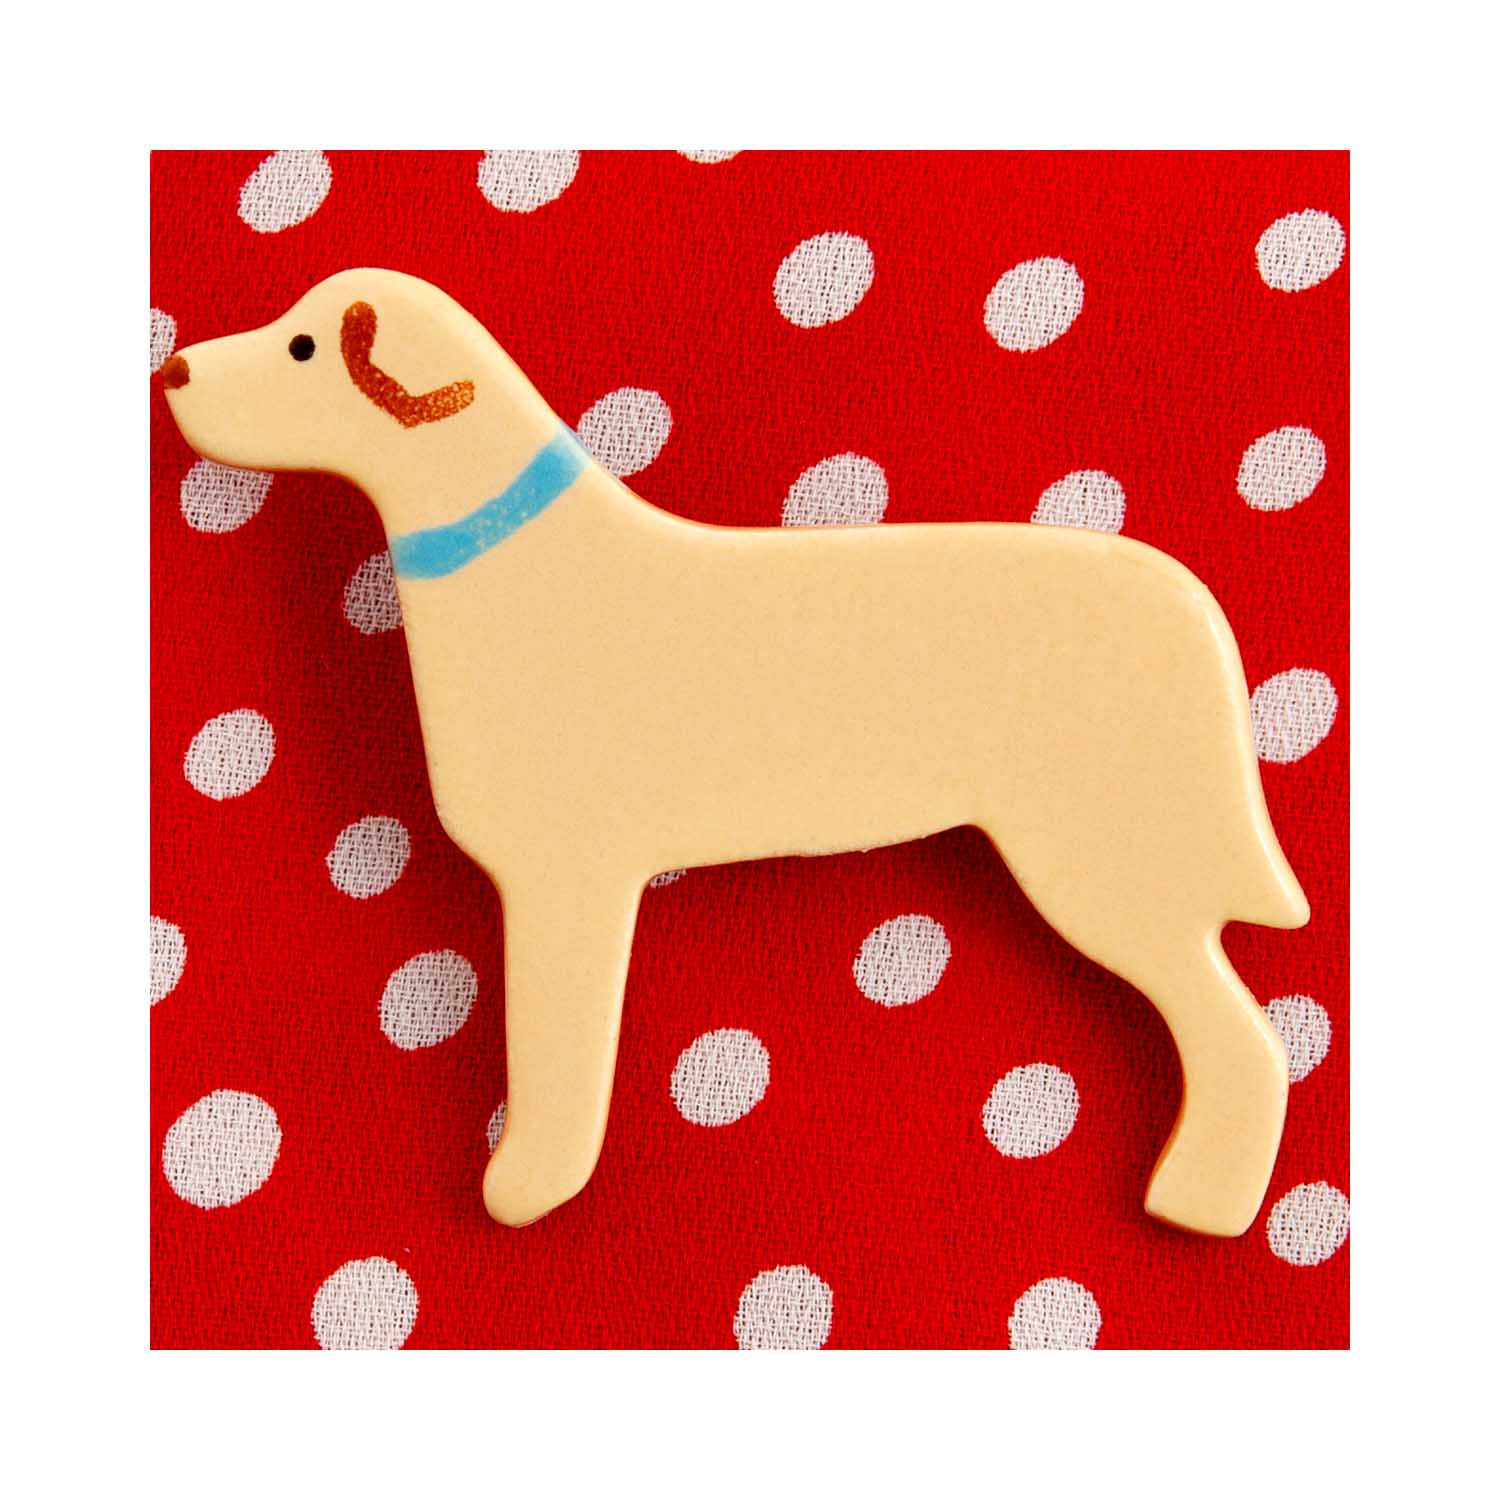 Dog Lover Gifts available at Dog Krazy Gifts – Ceramic Yellow Labrador Brooch by Mary Goldberg of Stockwell Ceramics, Just Part Of Our Collection Of Labrador Themed Gifts, Available At www.dogkrazygifts.co.uk